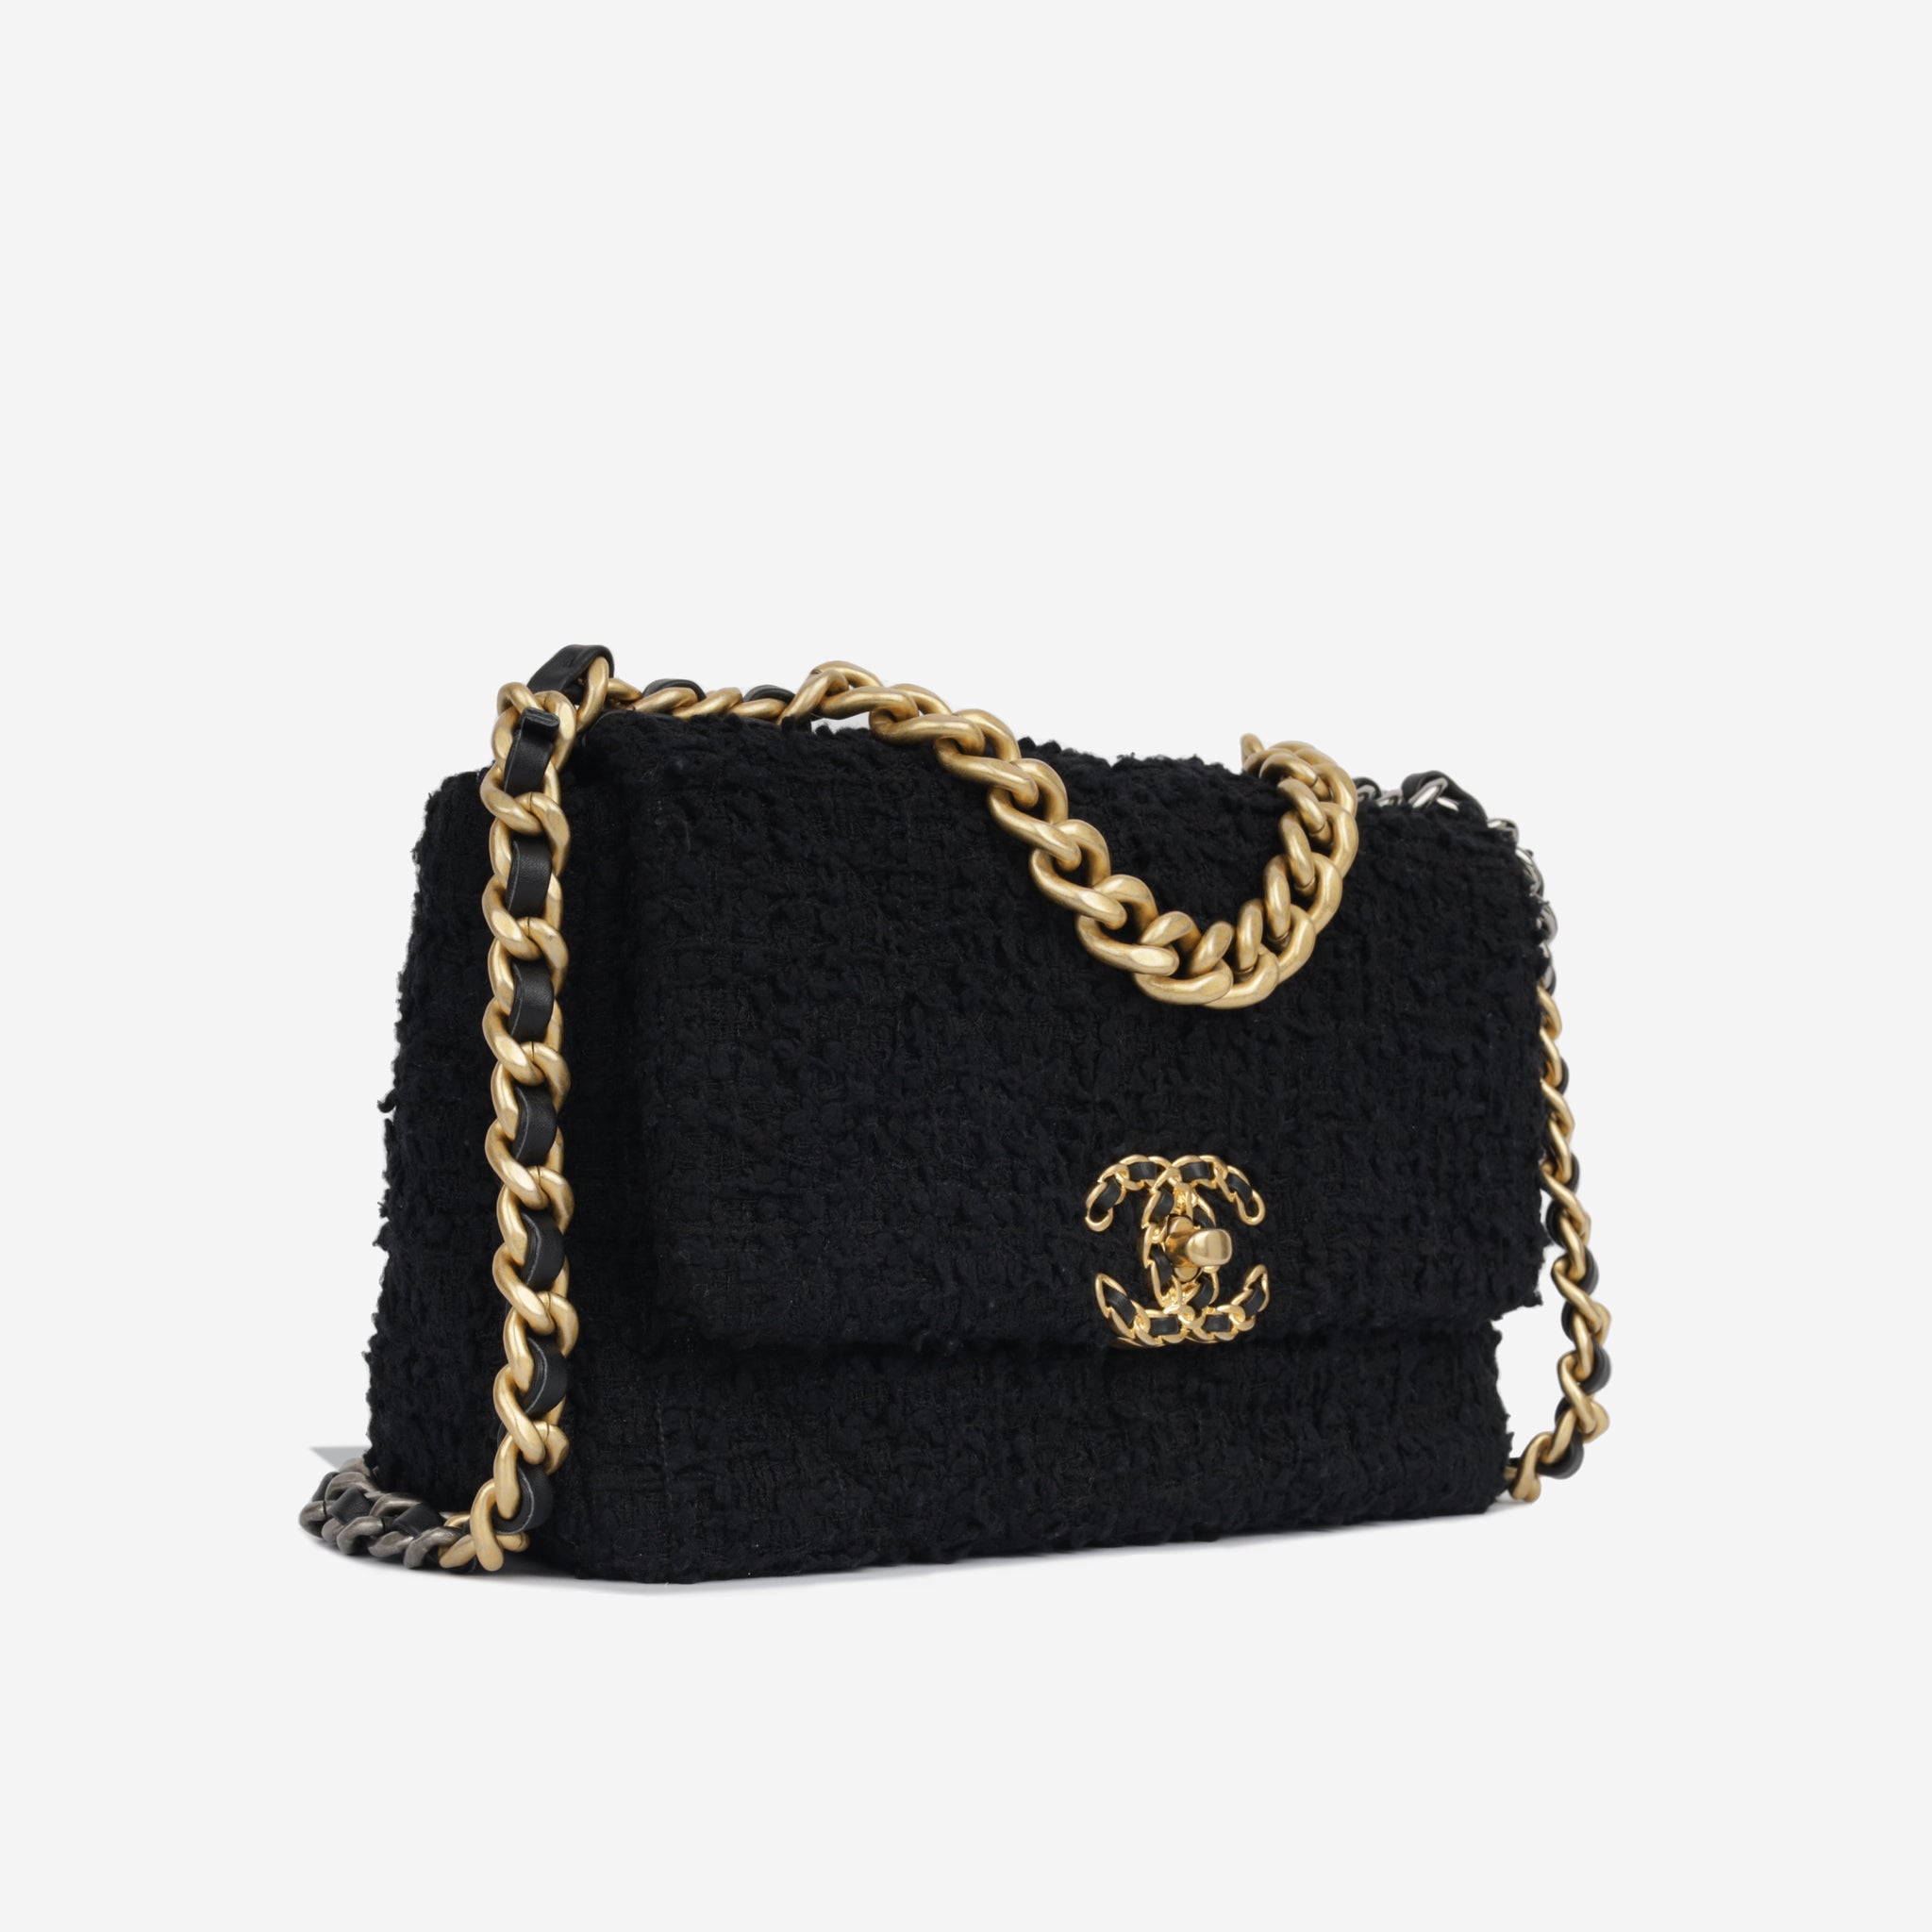 CHANEL 19 Small Tweed Flap Bag Handtasche - MyLovelyBoutique